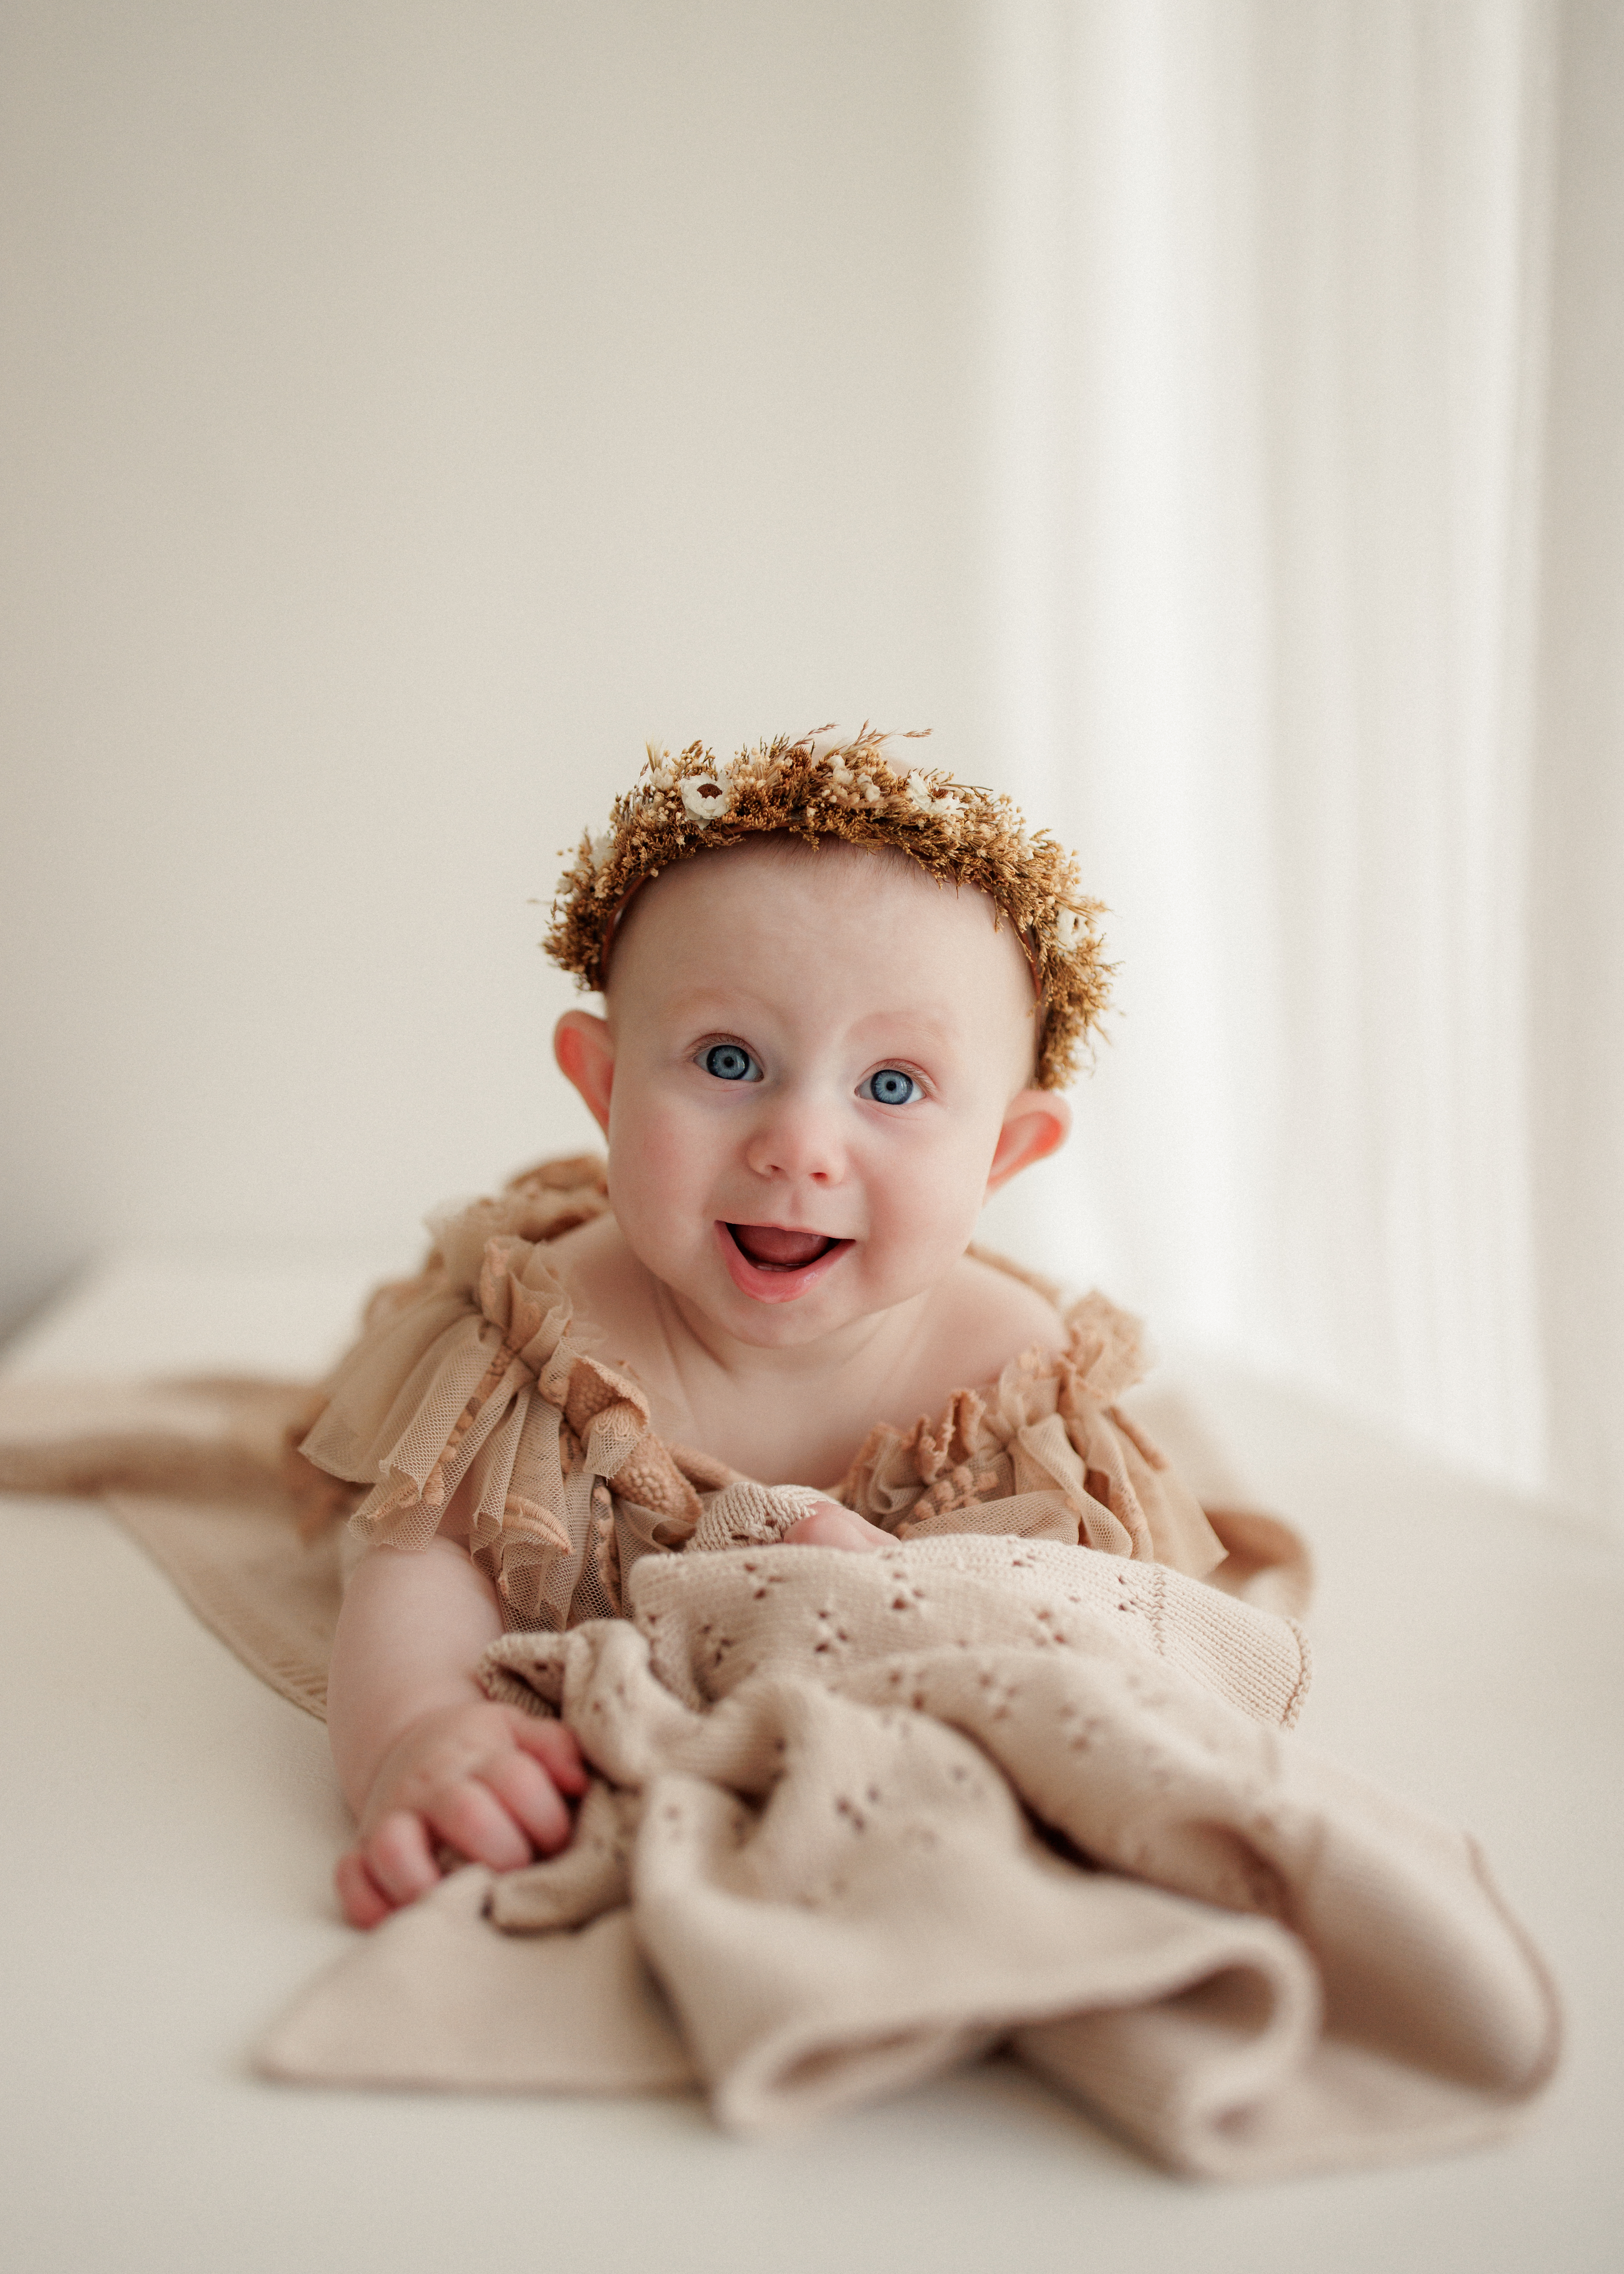 Chicagoland baby photographer